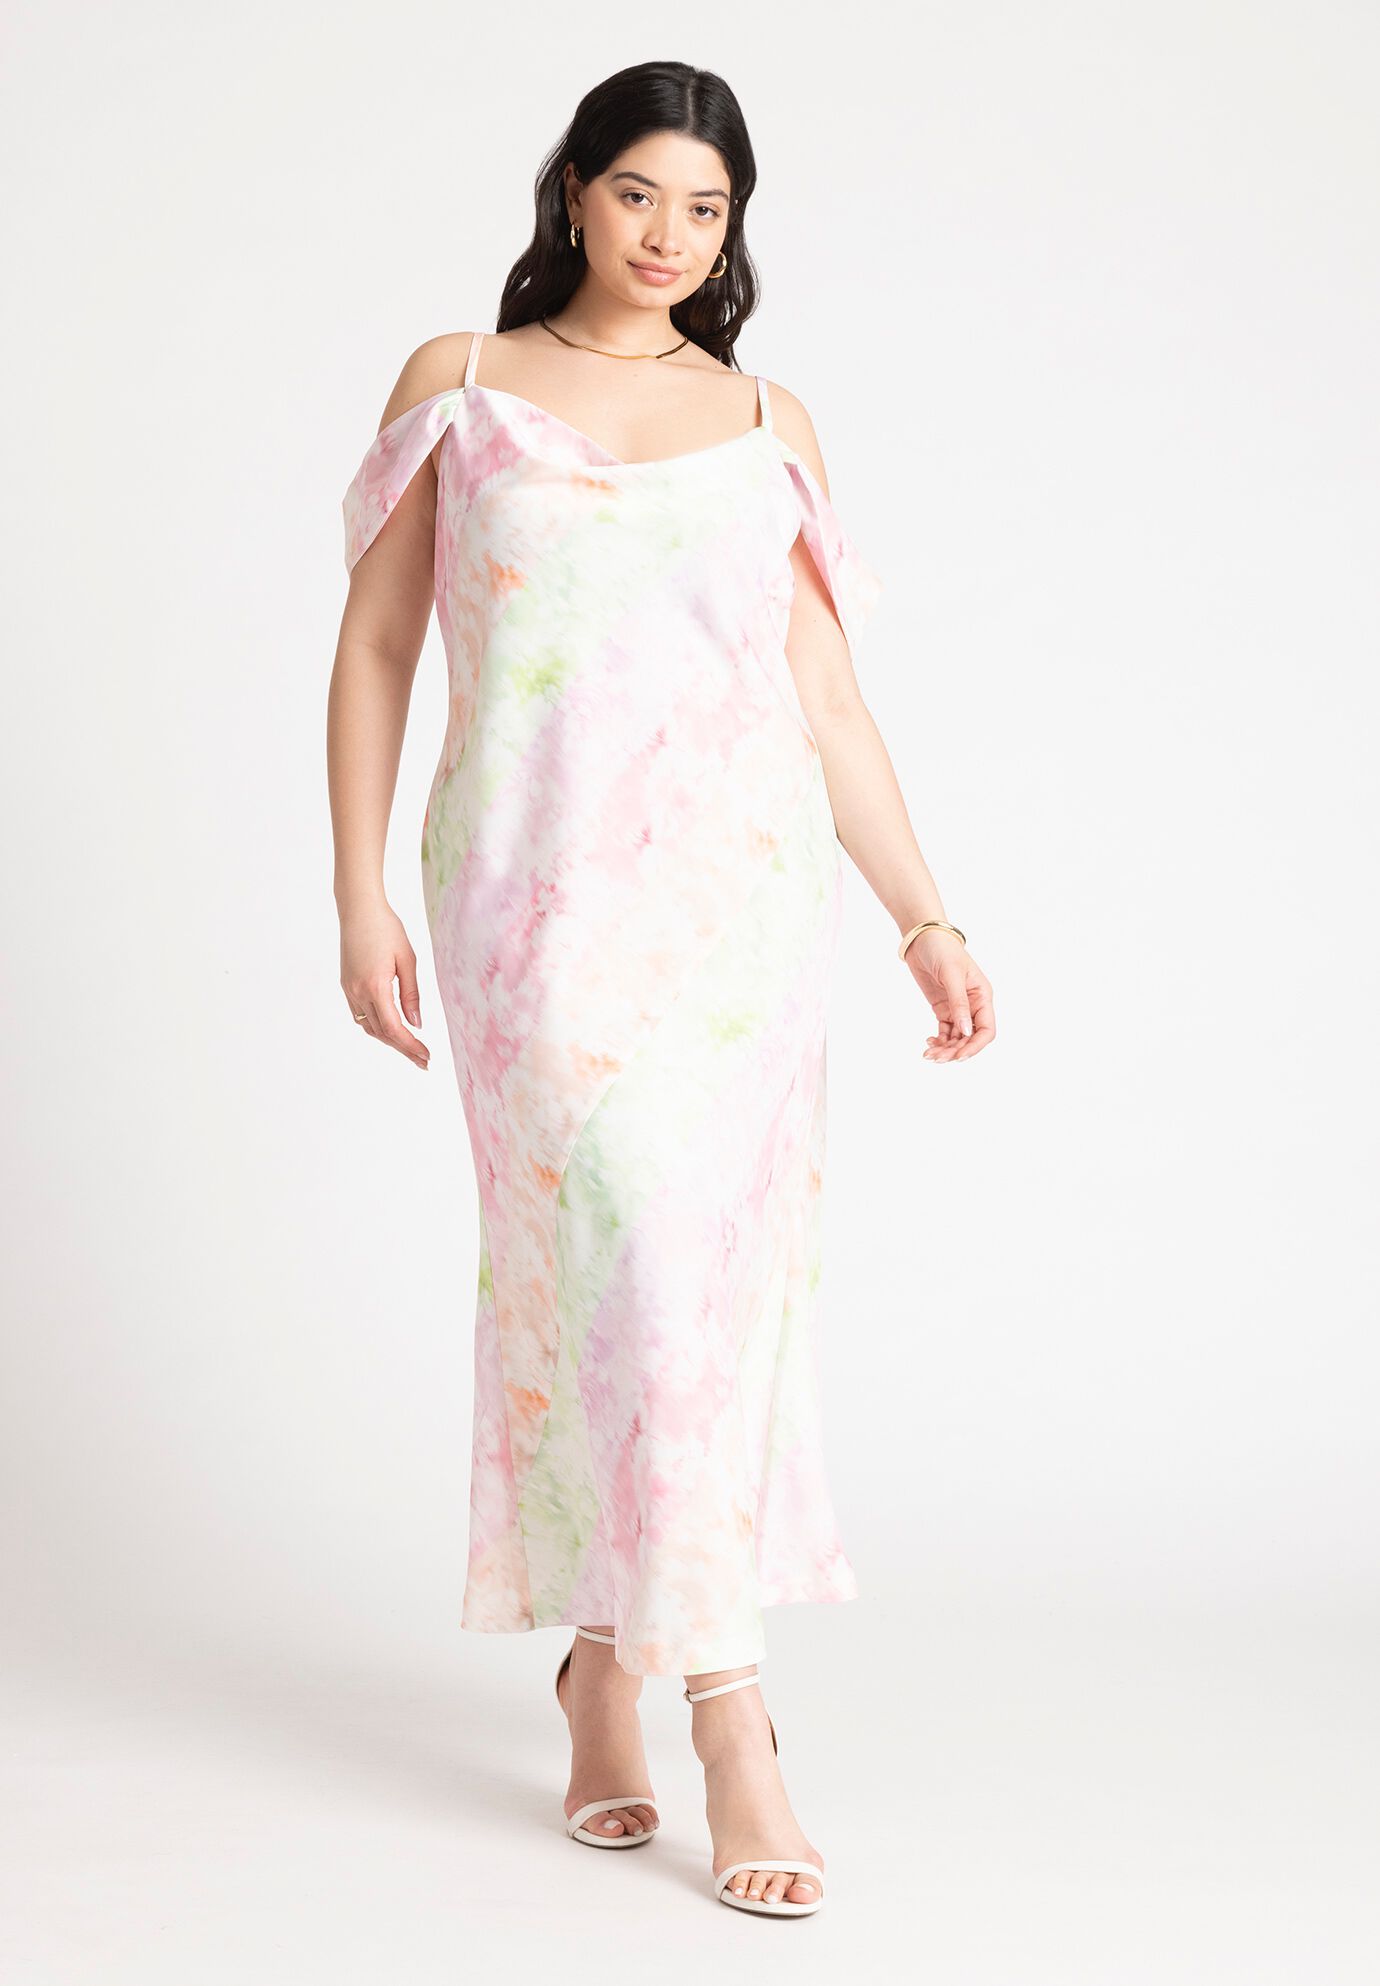 Draped Floral Print Cowl Neck Dress by Eloquii